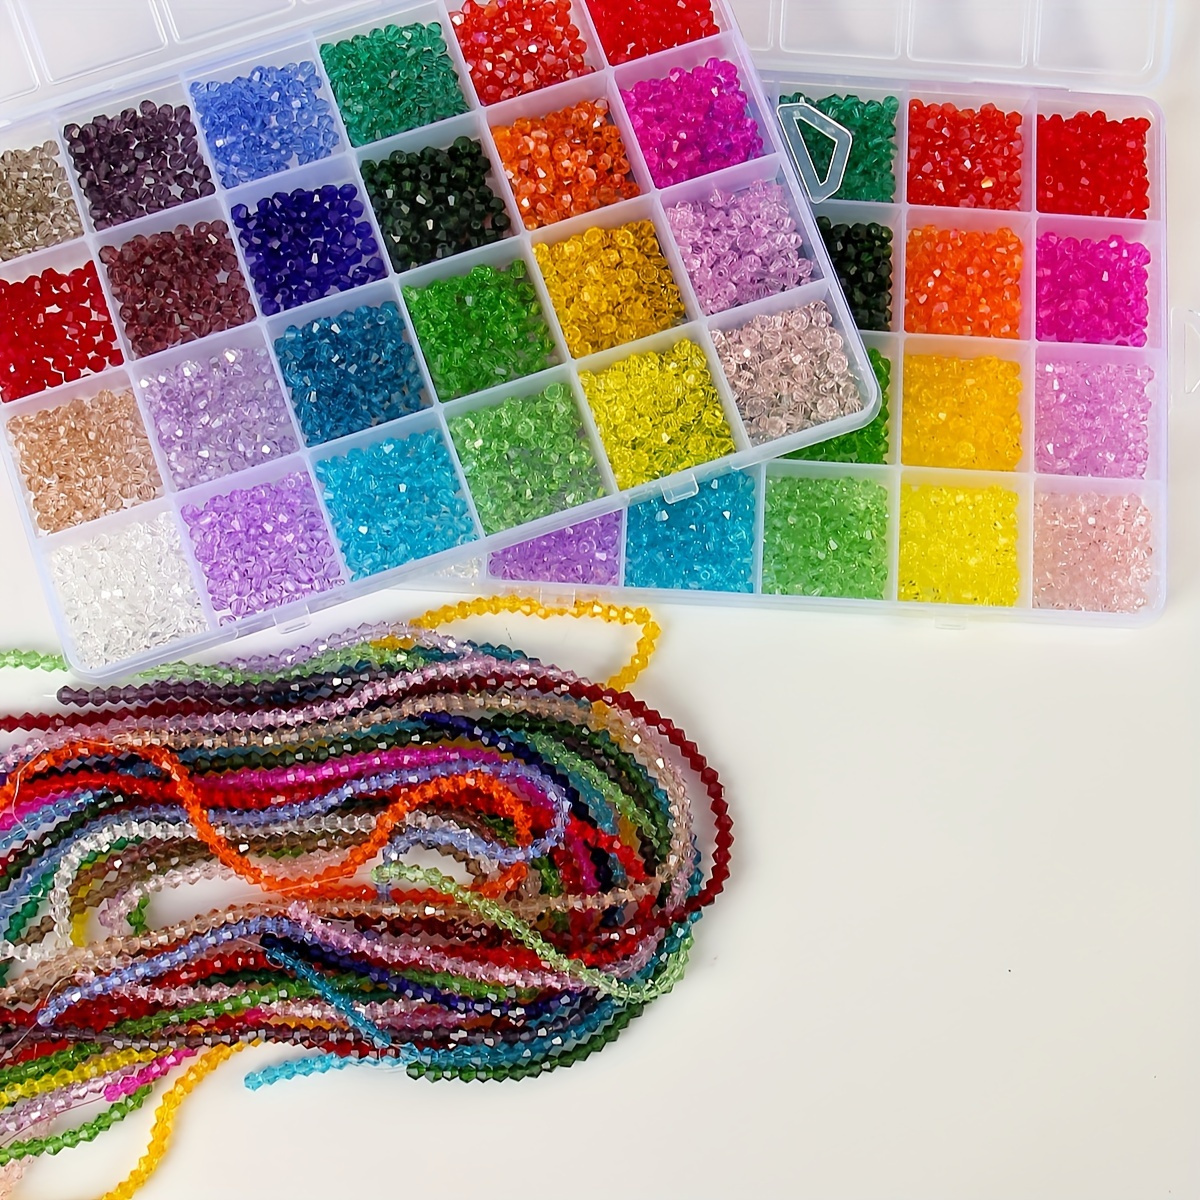 

2160pcs Glass Beading Kit: 24 Colors 4mm Faceted Crystal Beads Set For Jewelry Making, Diy Bracelets, Necklaces, Rings, Art Crafts Accessories With Ab Spacer Beads